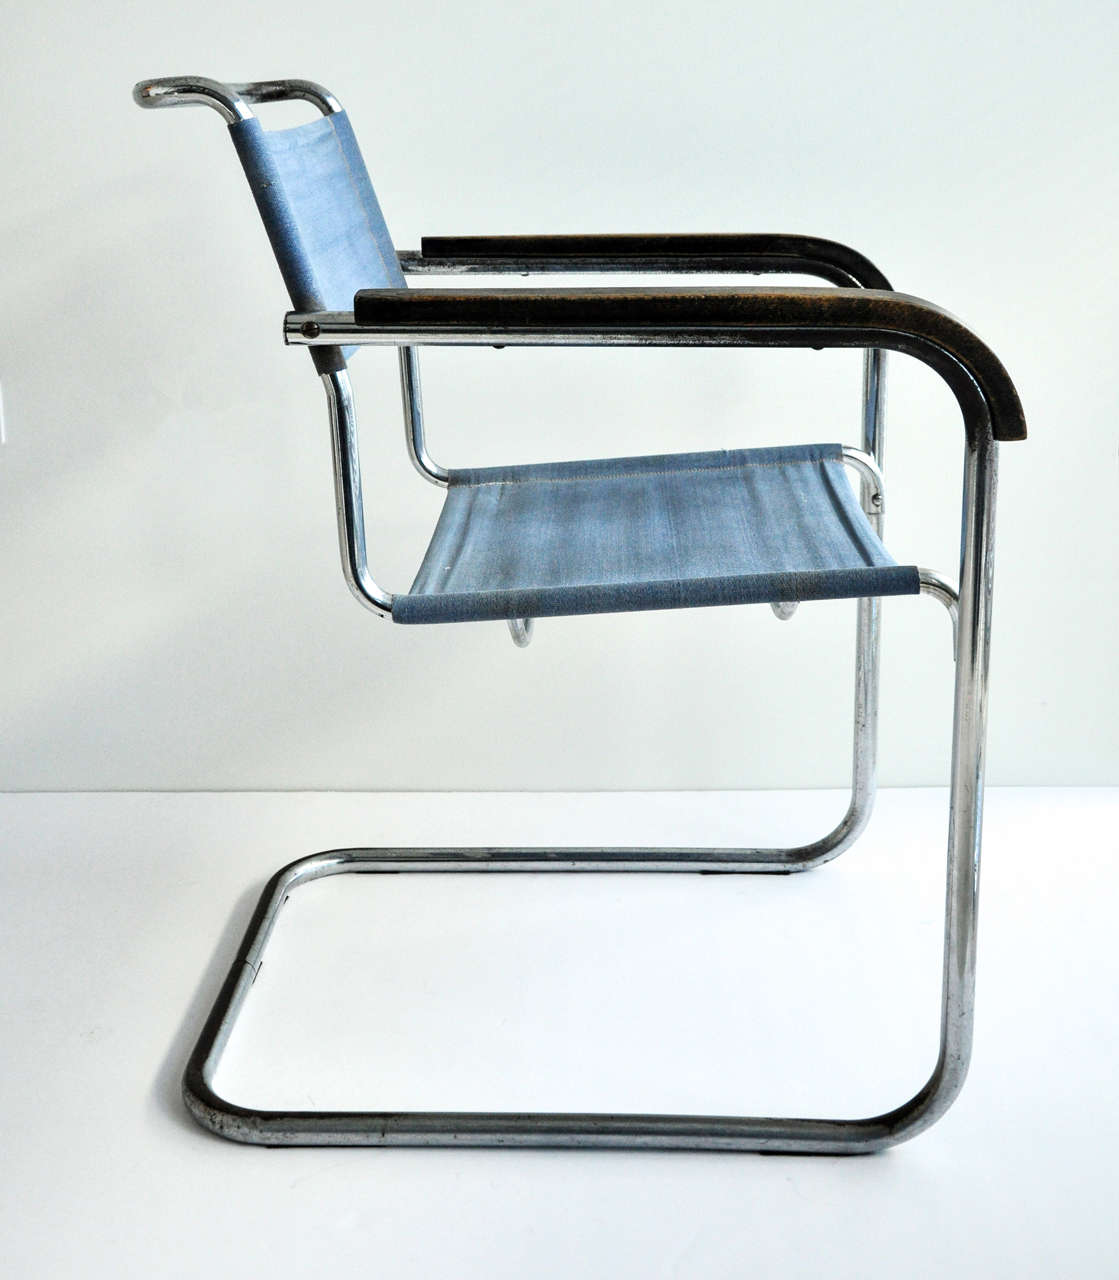 A cantilevered tubular steel armchair with wood armrest originally designed  in 1928 for Thonet by the modernist architect and furniture designer Marcel Breuer (1902-81). This chair is a variation of the B34 armchair. Blue Eisengarn fabric (a stiff